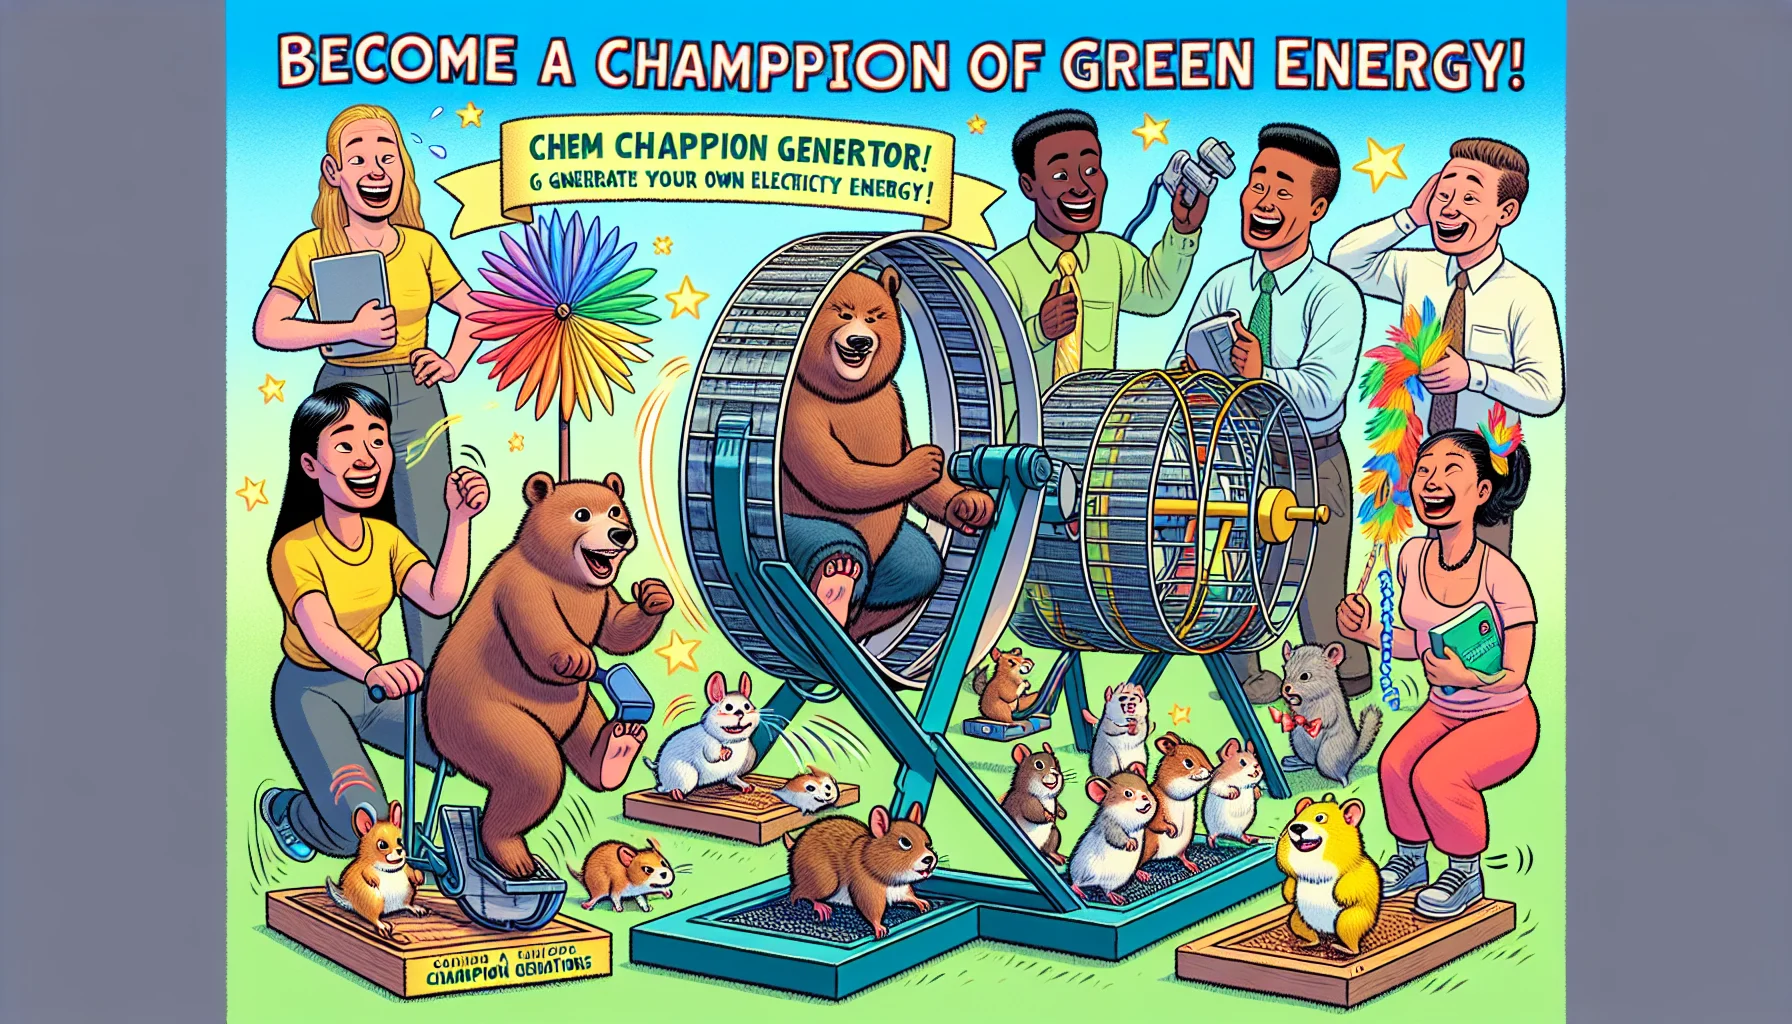 Create a detailed and vivid picture illustrating a humorous situation where champion generators are in use. These champion generators are diversified and positioned in various funny situations that encourage audience to generate their own electricity. One generator is being pedaled by a friendly bear, another one is attached to a group of hamsters running in their wheel, and yet another one is connected to a windmill made of brightly colored feathers. At the back, a banner with the text 'Become A Champion of Green Energy!' is displayed. Include human representation showing diverse individuals - Caucasian woman, Hispanic man, Black woman and a Middle-Eastern man - laughing at these funny scenarios while also appreciating the importance of electricity generation.